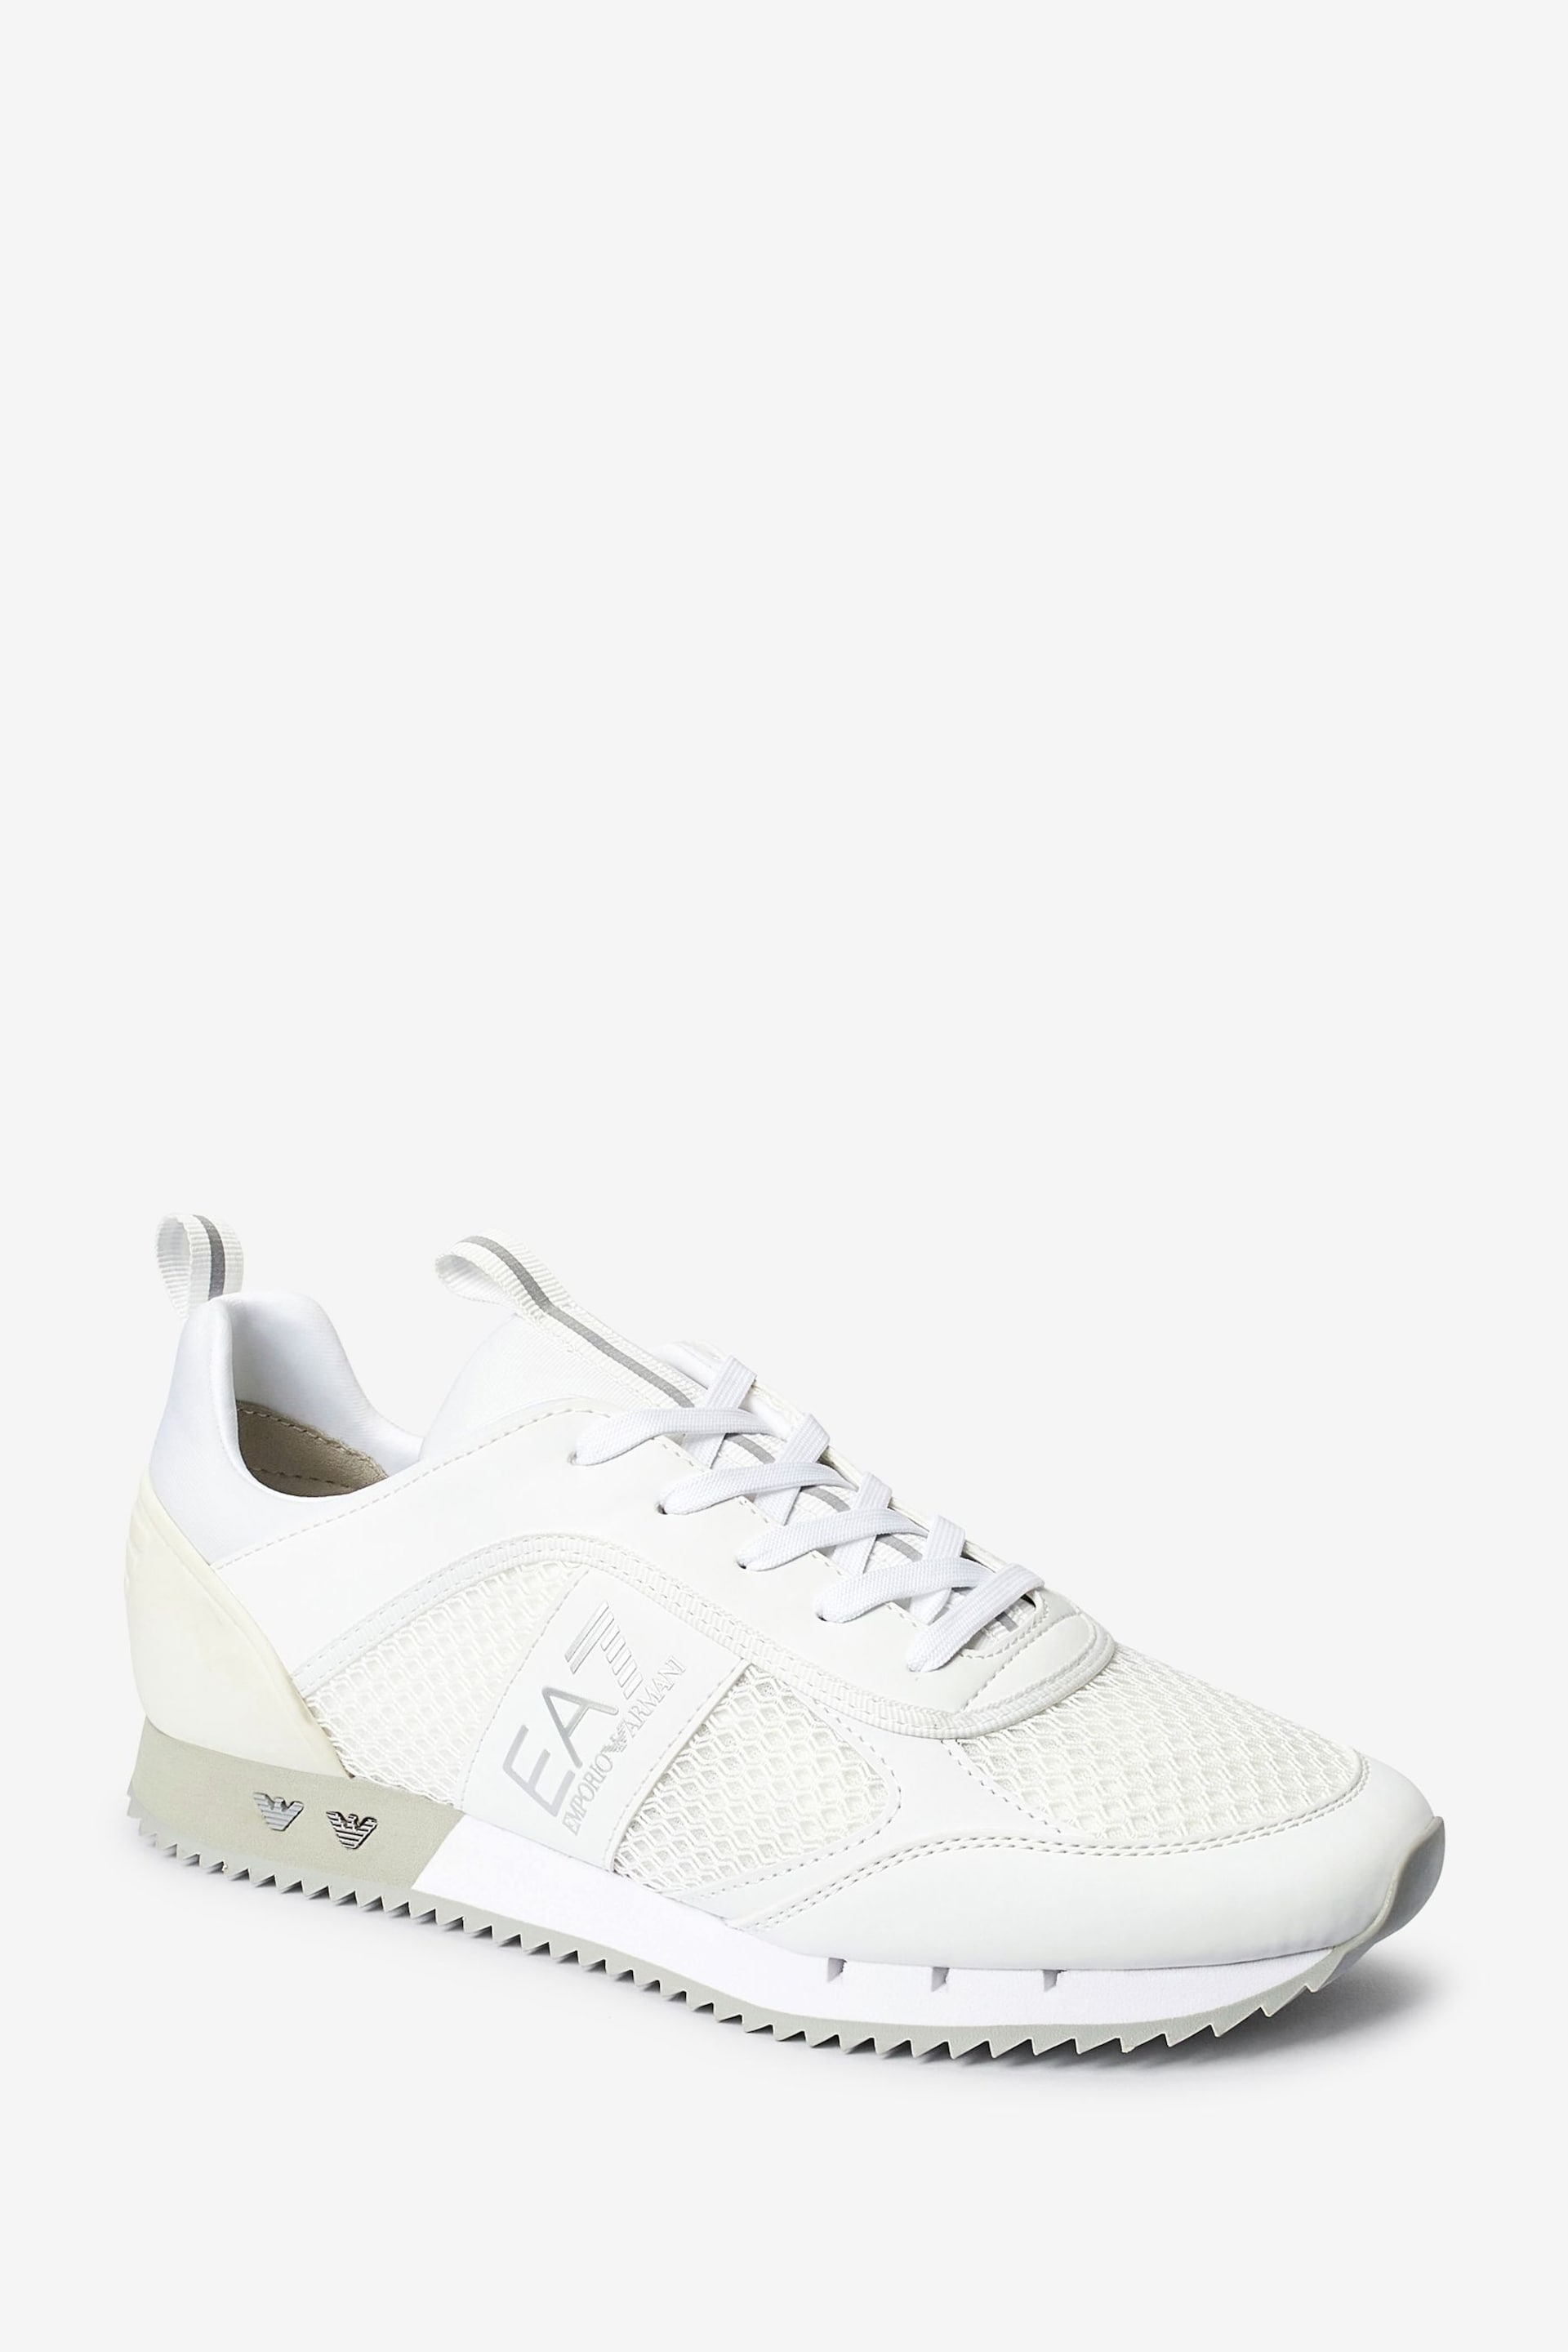 Emporio Armani EA7 Evolution Lace-Up Racer Trainers - Image 2 of 5